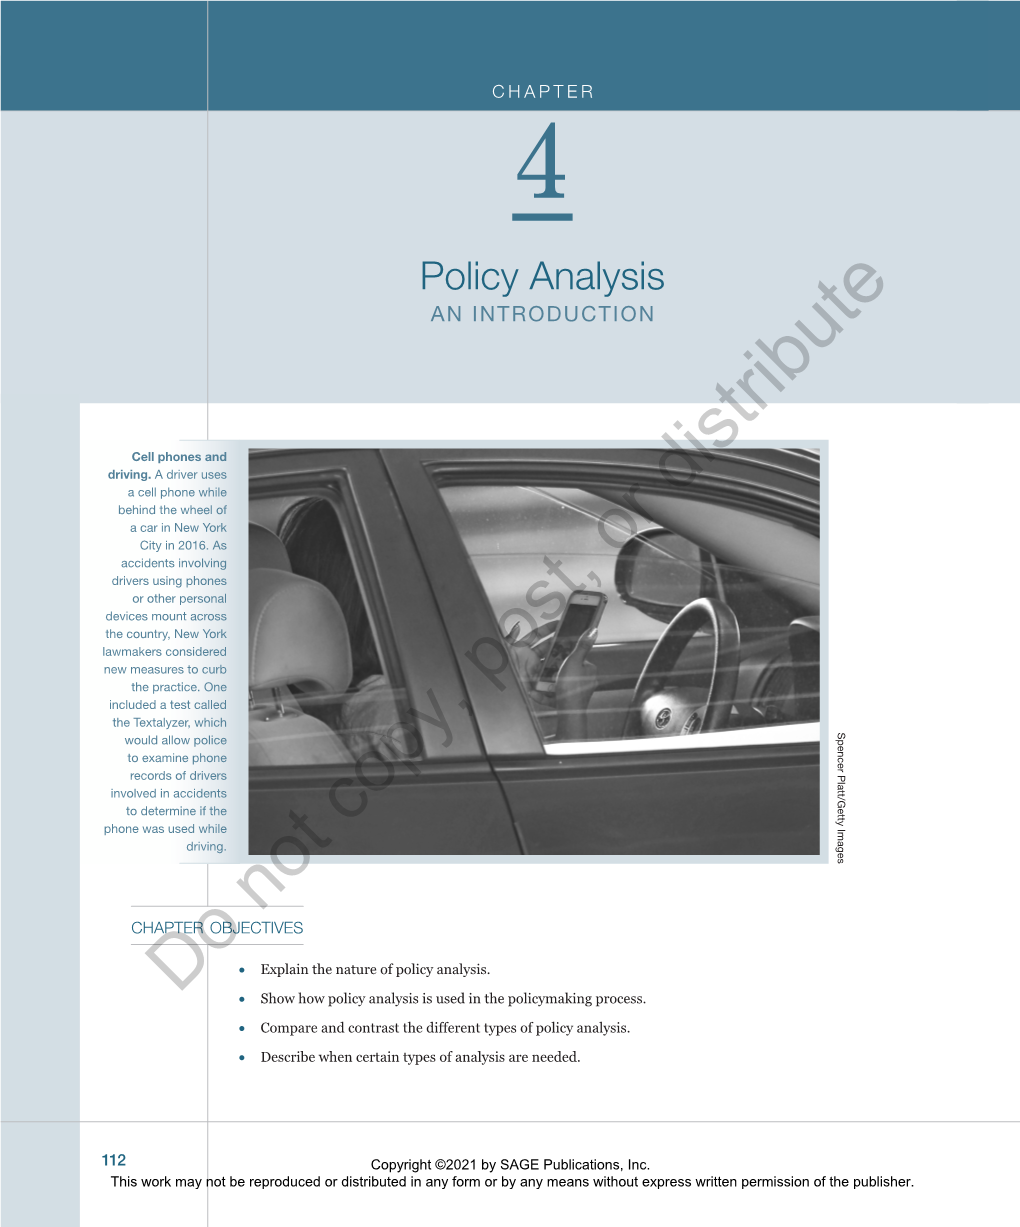 Policy Analysis an INTRODUCTION